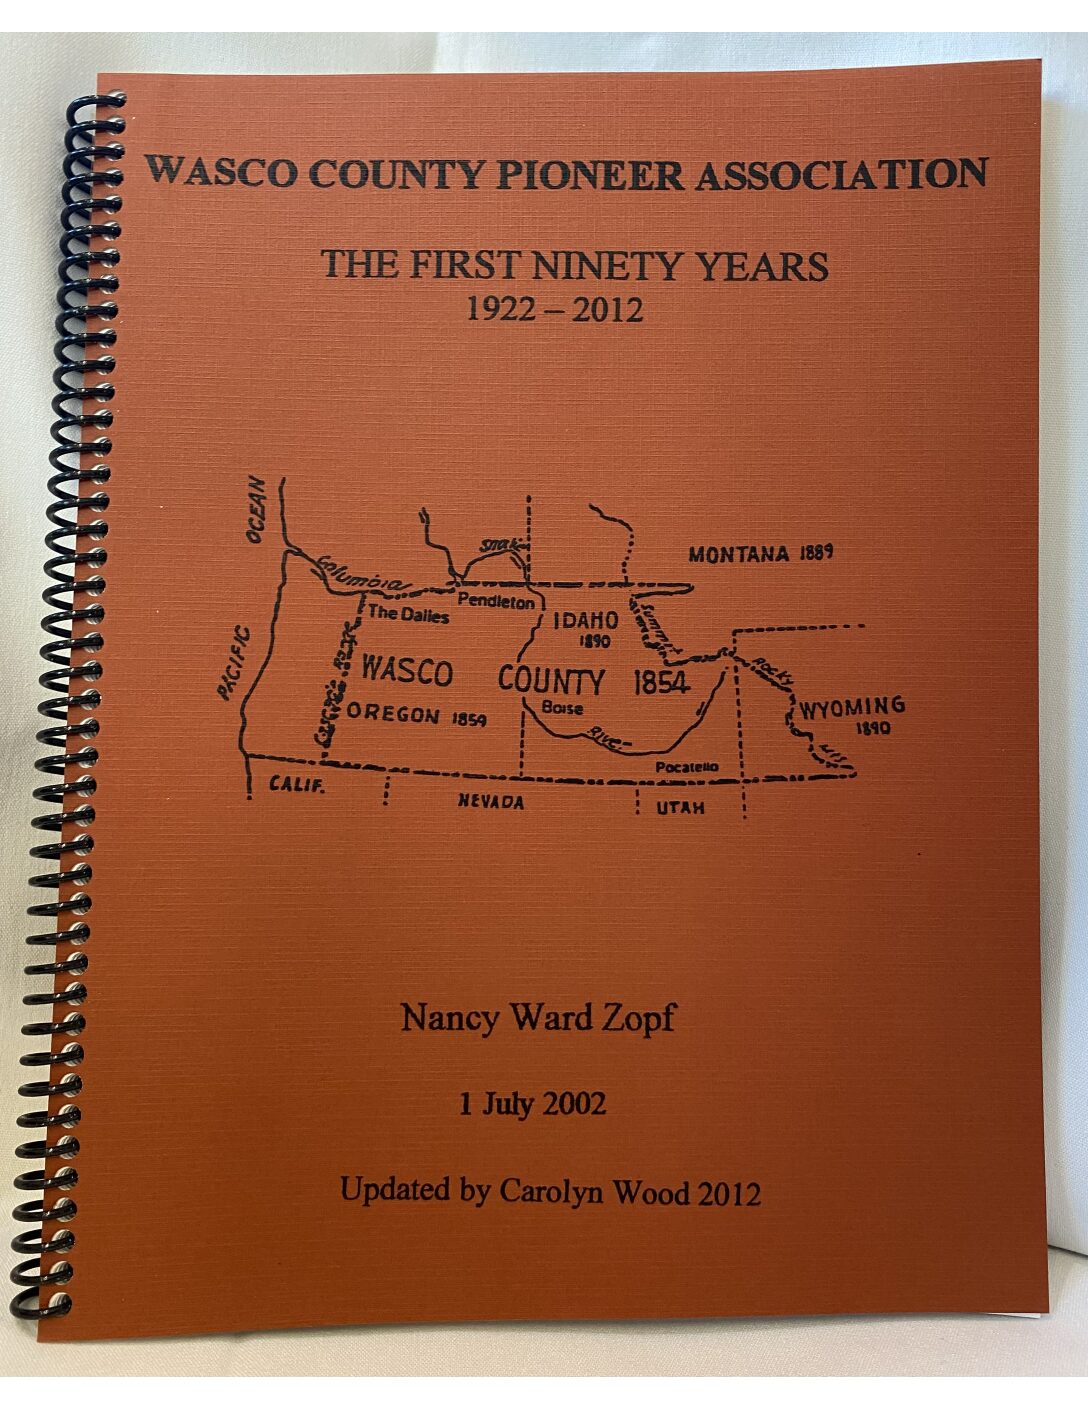 Wasco County, The First Ninety Years 1922-2002 (Book)